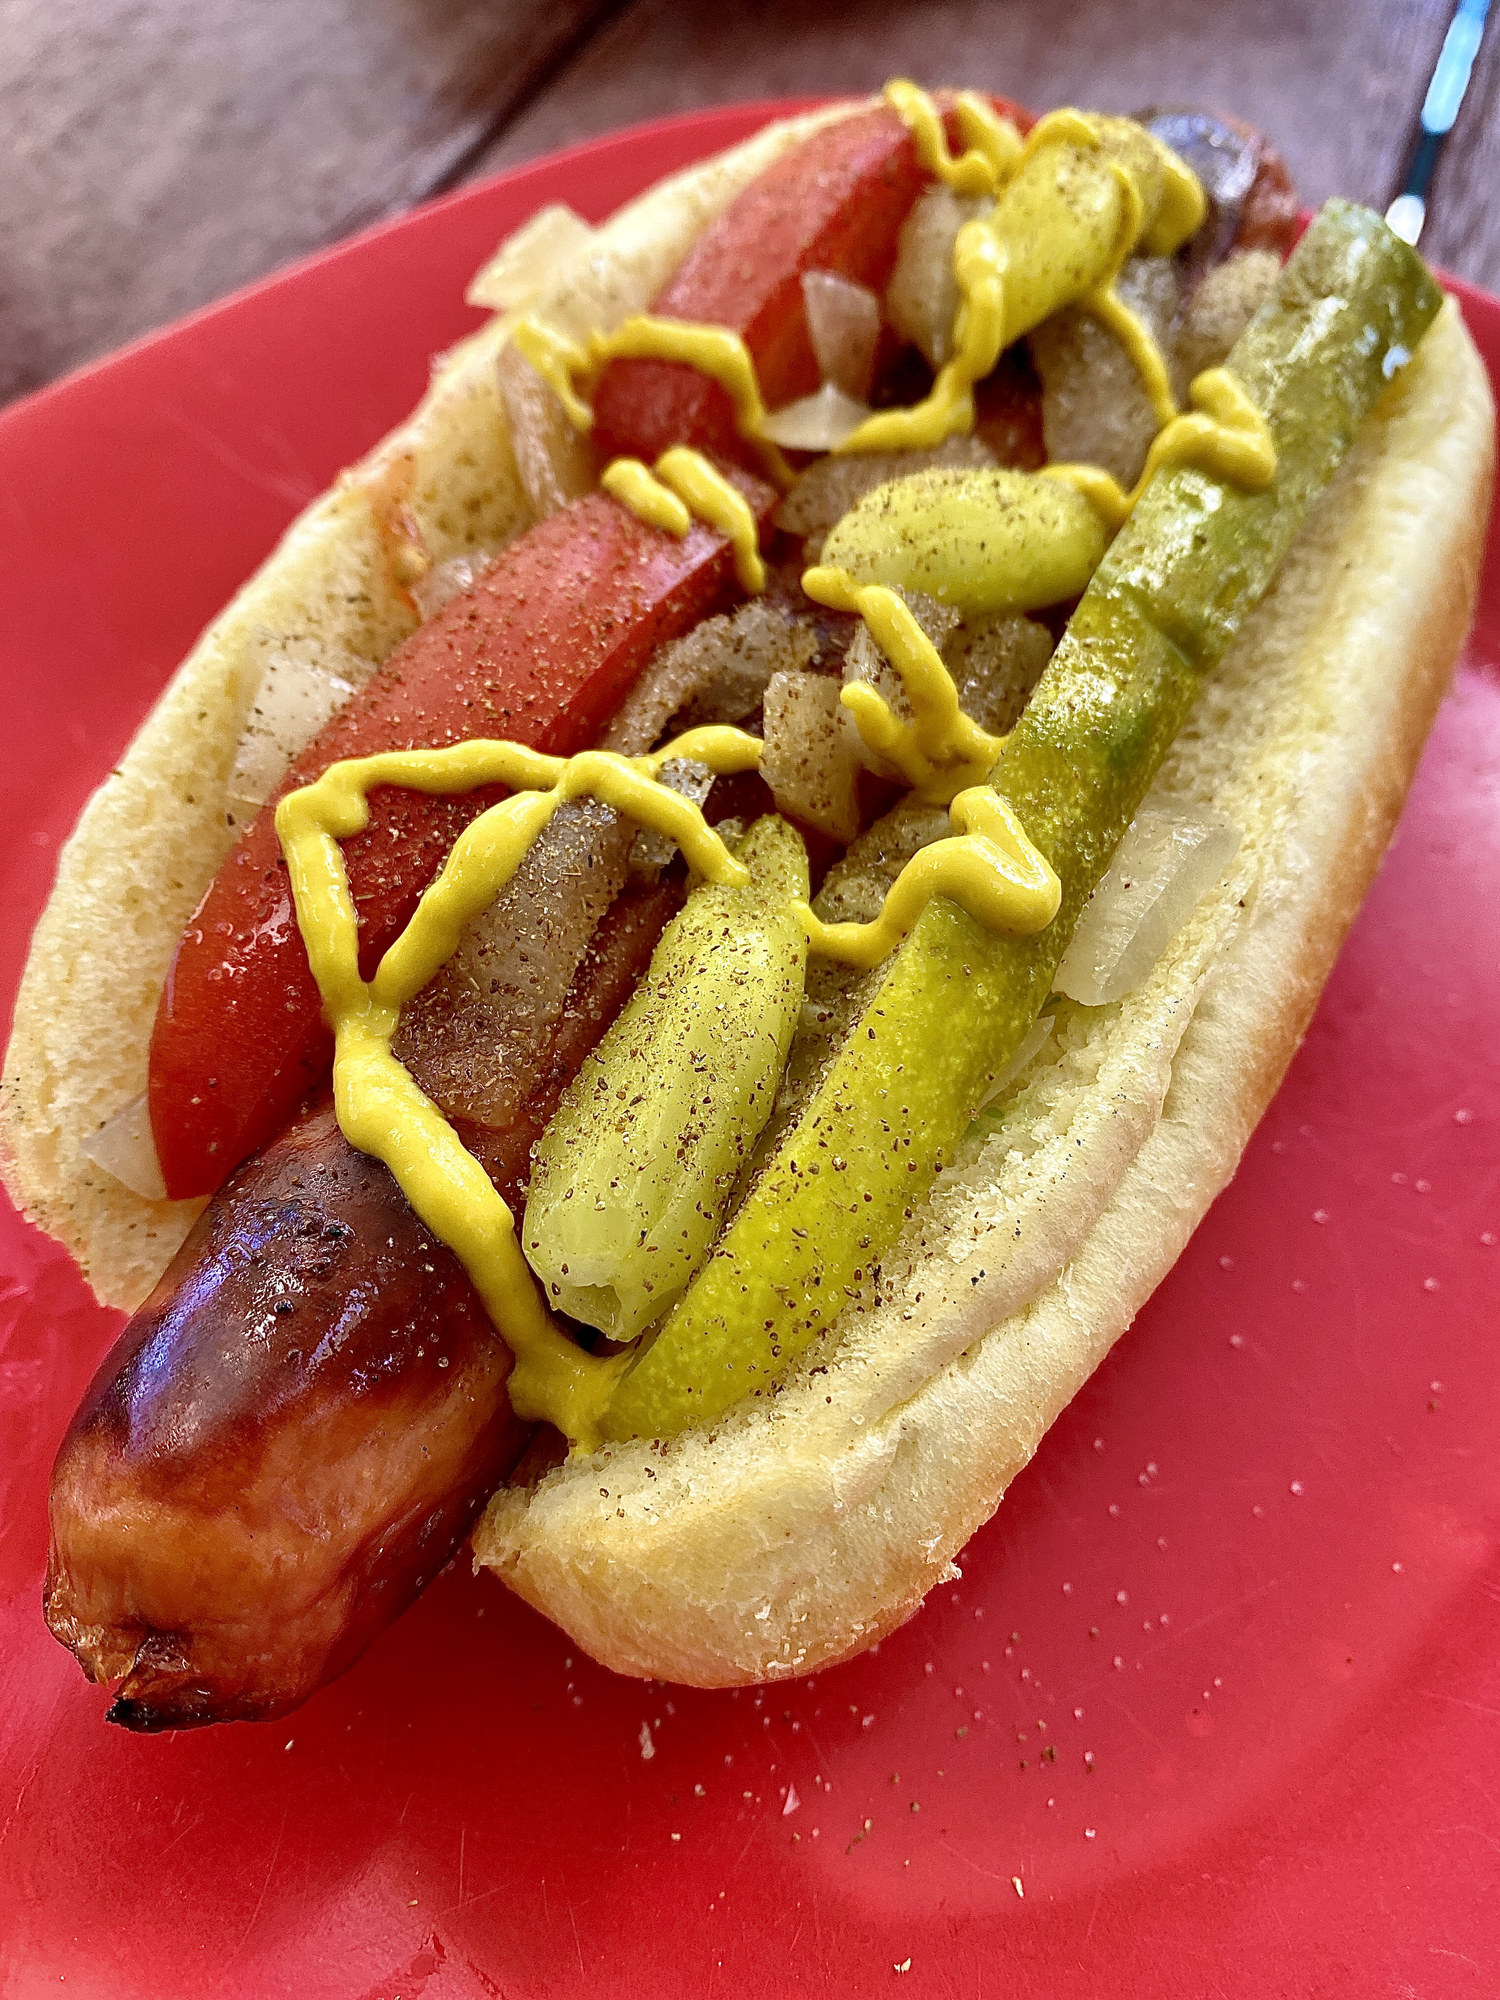 A Chicago hot dog with pickle and tomato